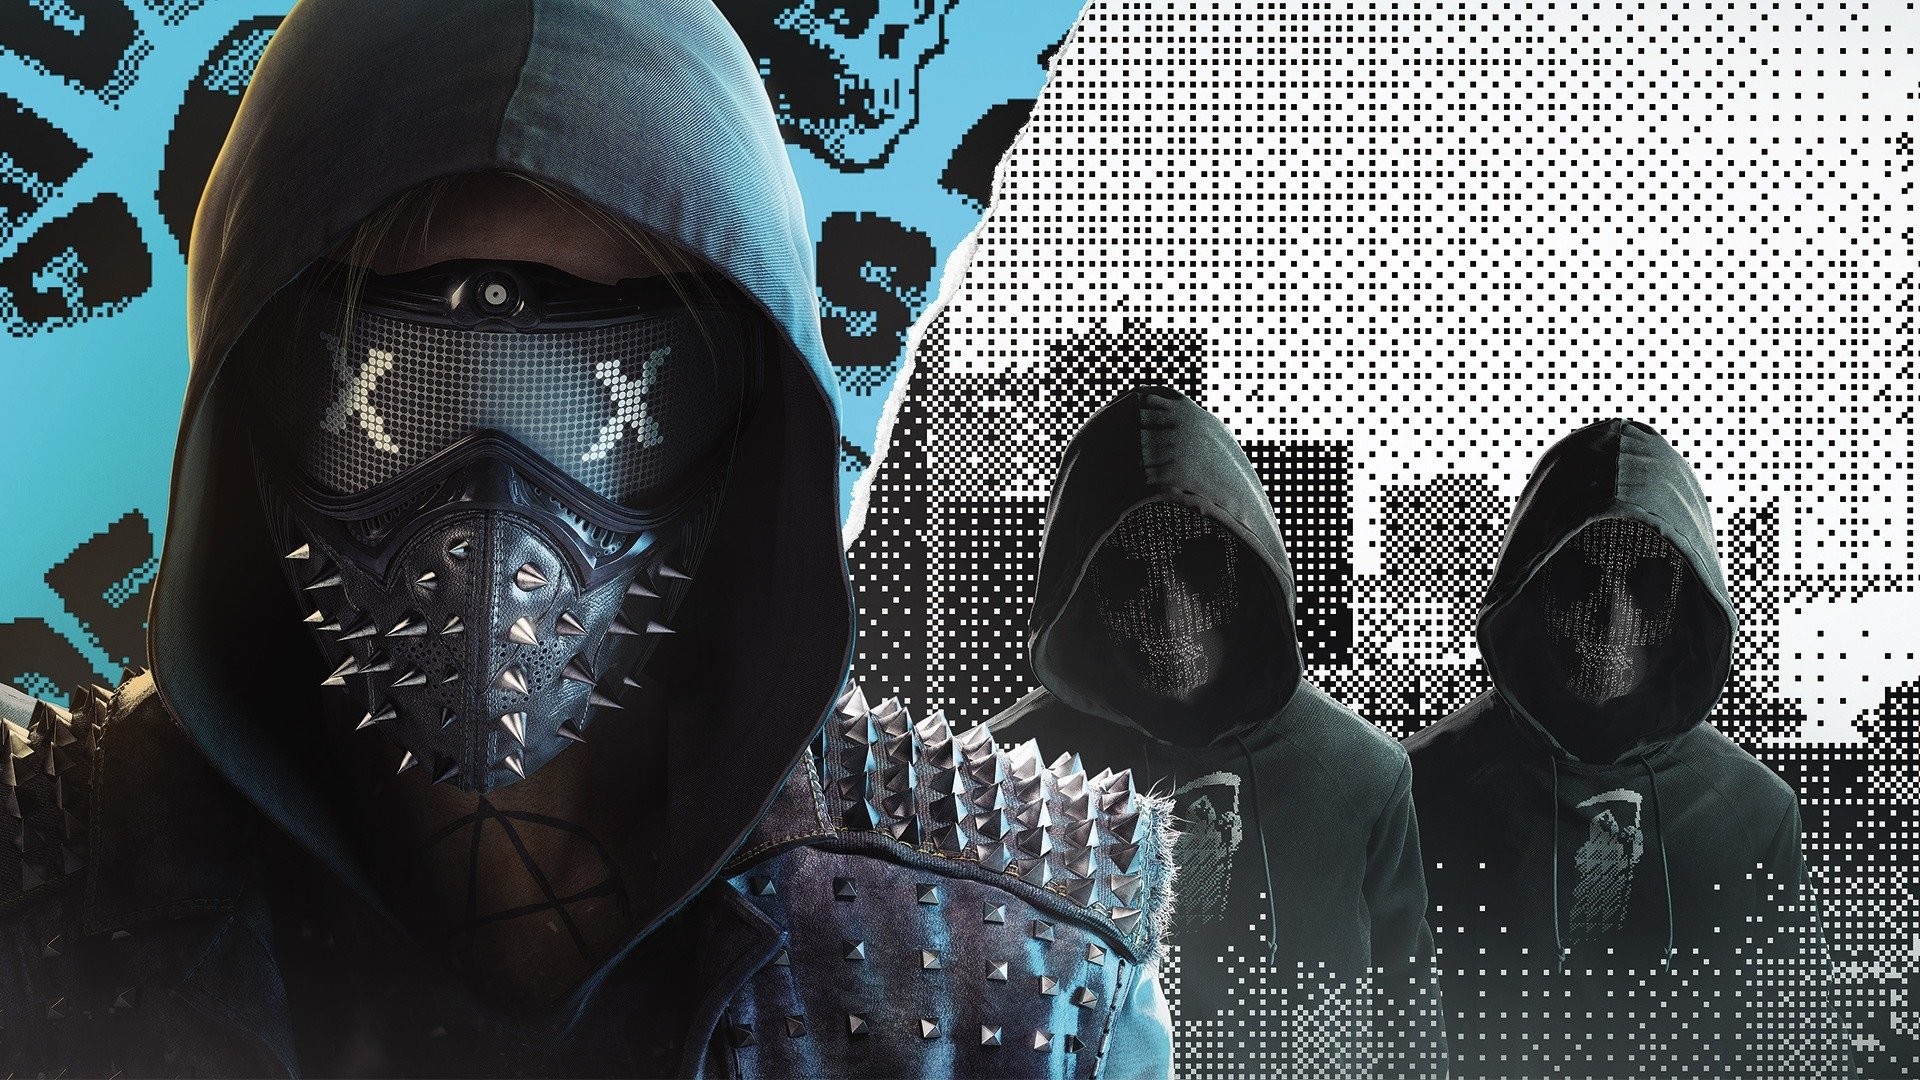 how to download watch dogs 2 on pc for free